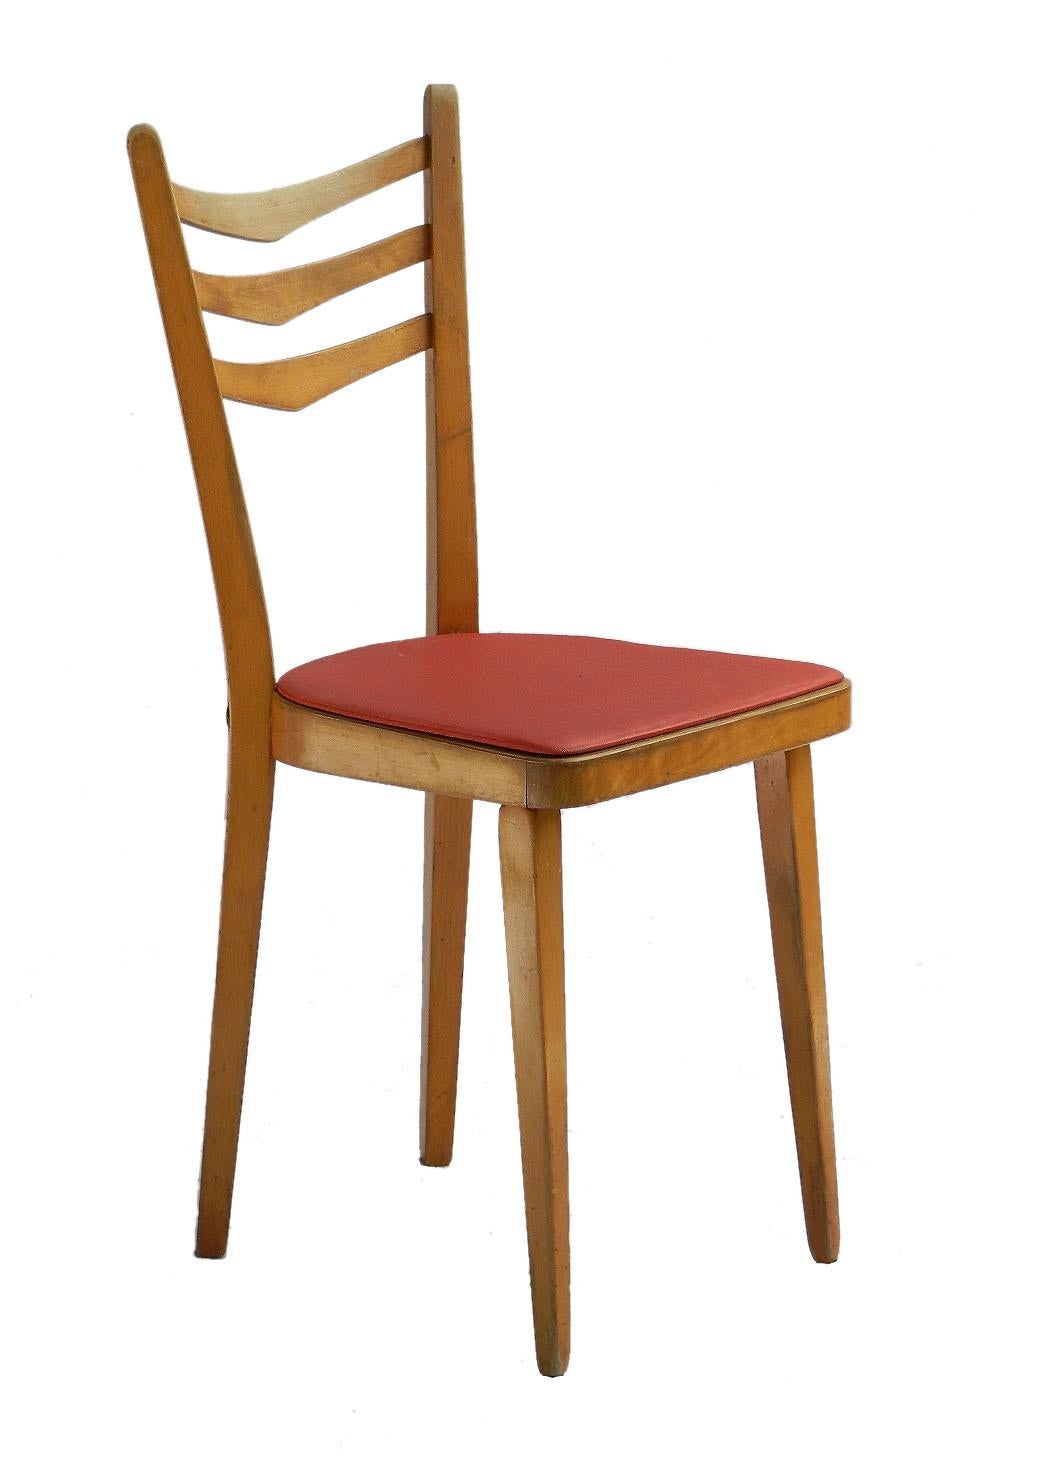 Five dining chairs vintage midcentury French, circa 1950-1960
Great shape.
Would work for a kitchen diner
Harlequin original color covers
Easily recovered to suit your interior.
In good vintage condition sound and solid with minor signs of wear